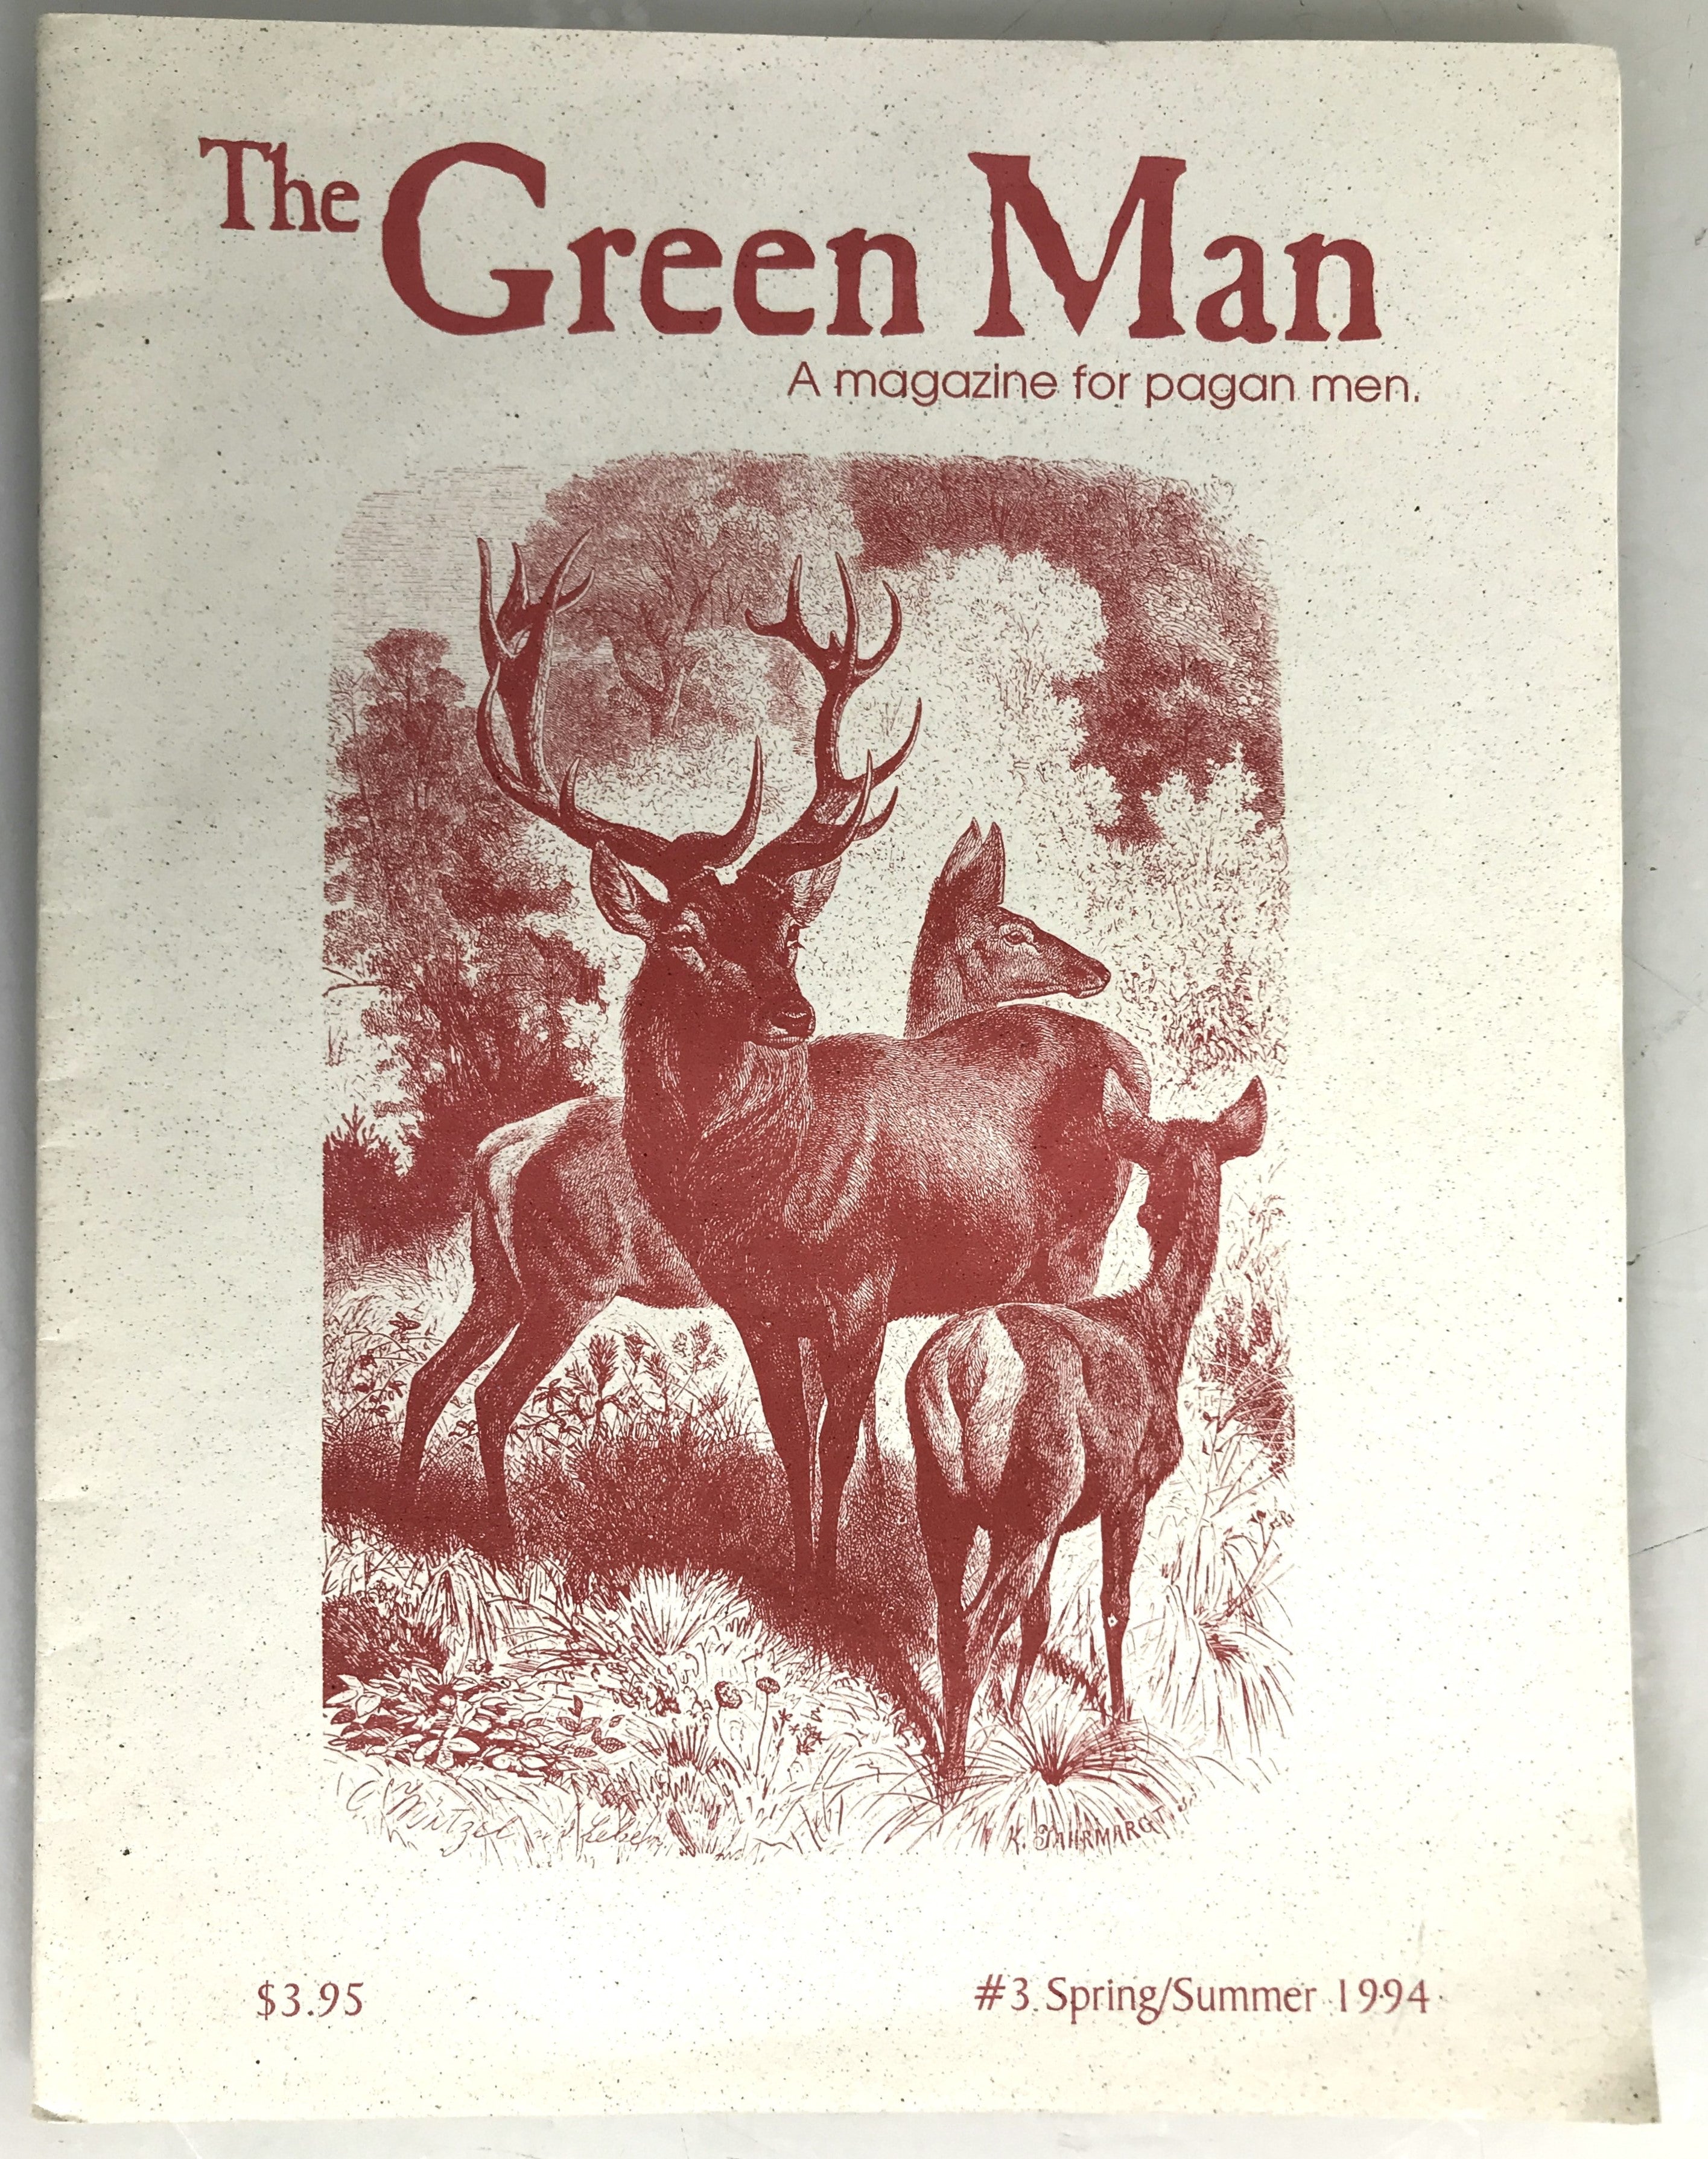 Lot of 2 The Green Man a Magazine for Pagan Men 1993-1994 SC